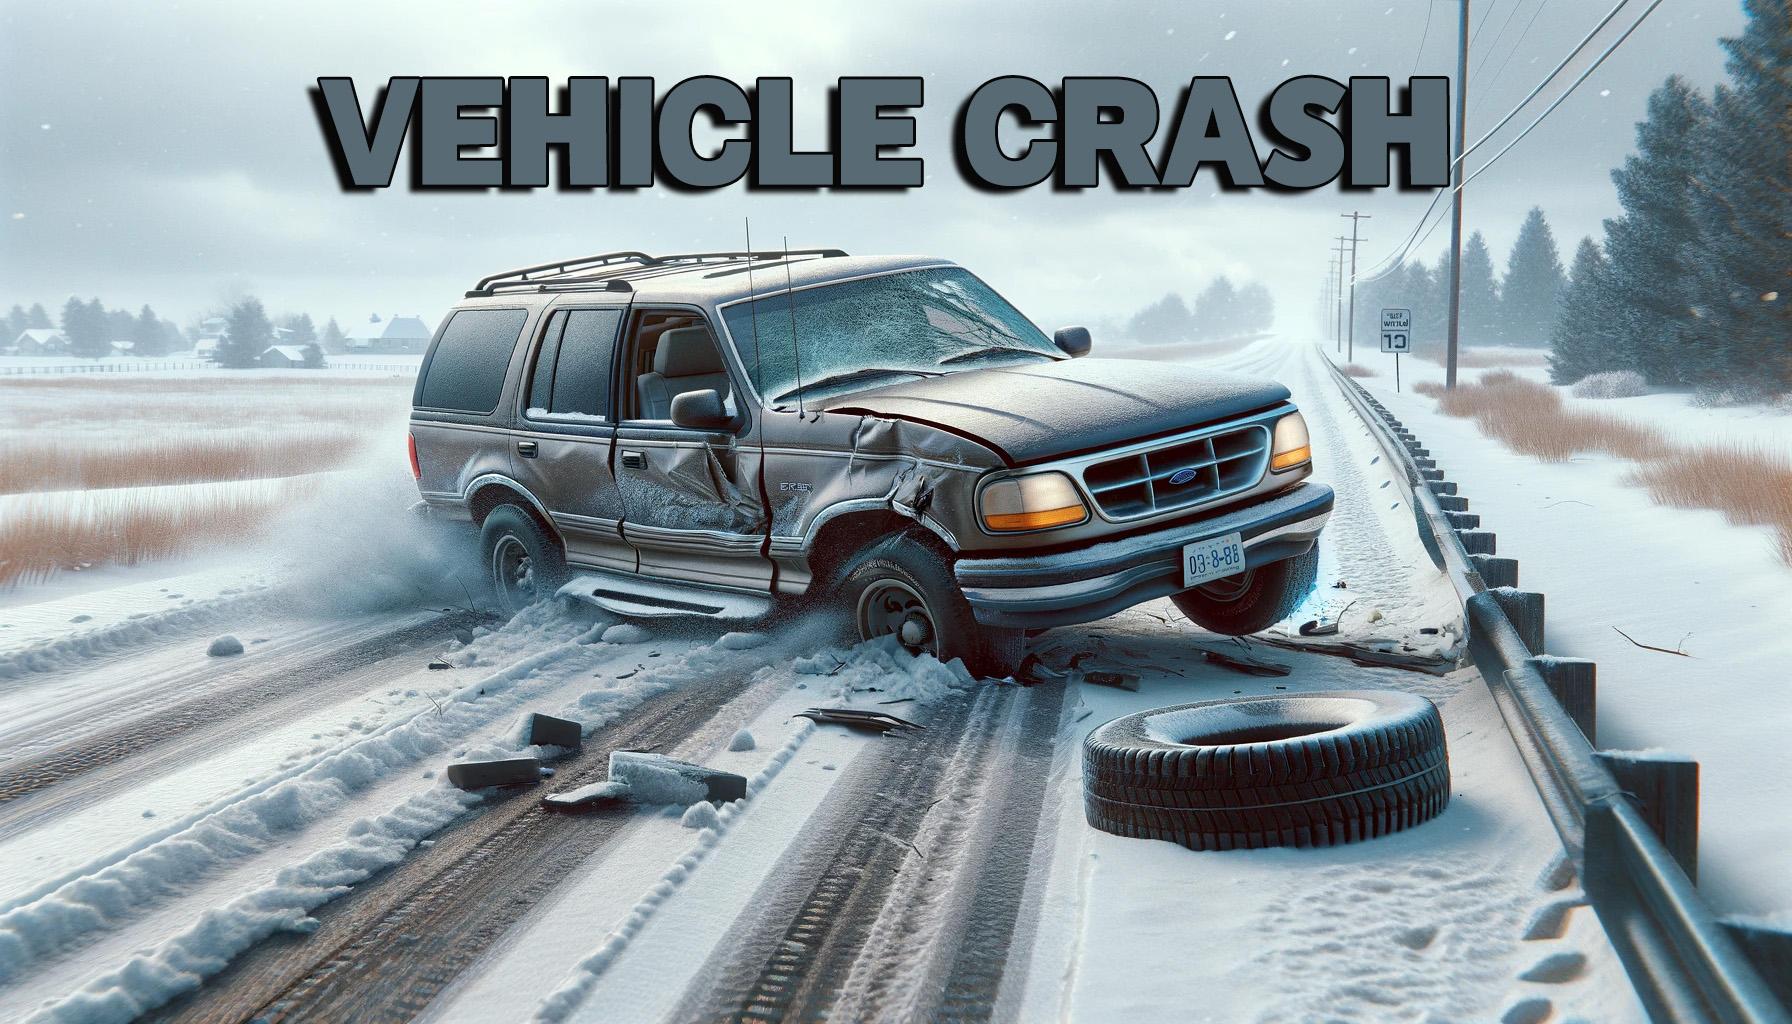 Ford Explorer vehicle crash or accident on snow covered road news graphic